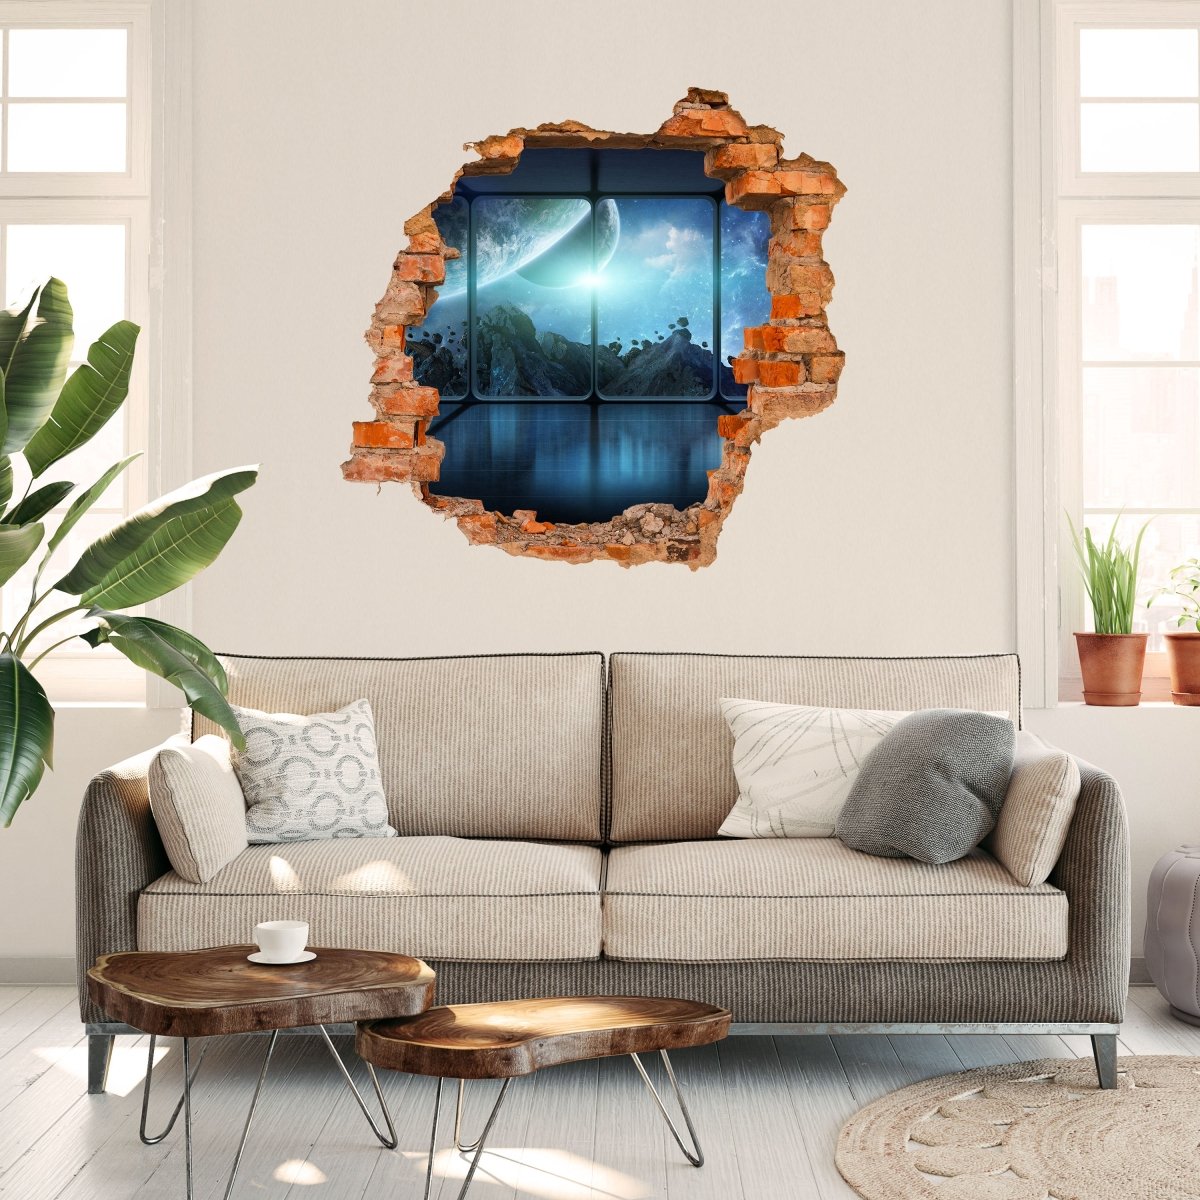 3D wall sticker view space station, asteroid, universe - Wall Decal M1072